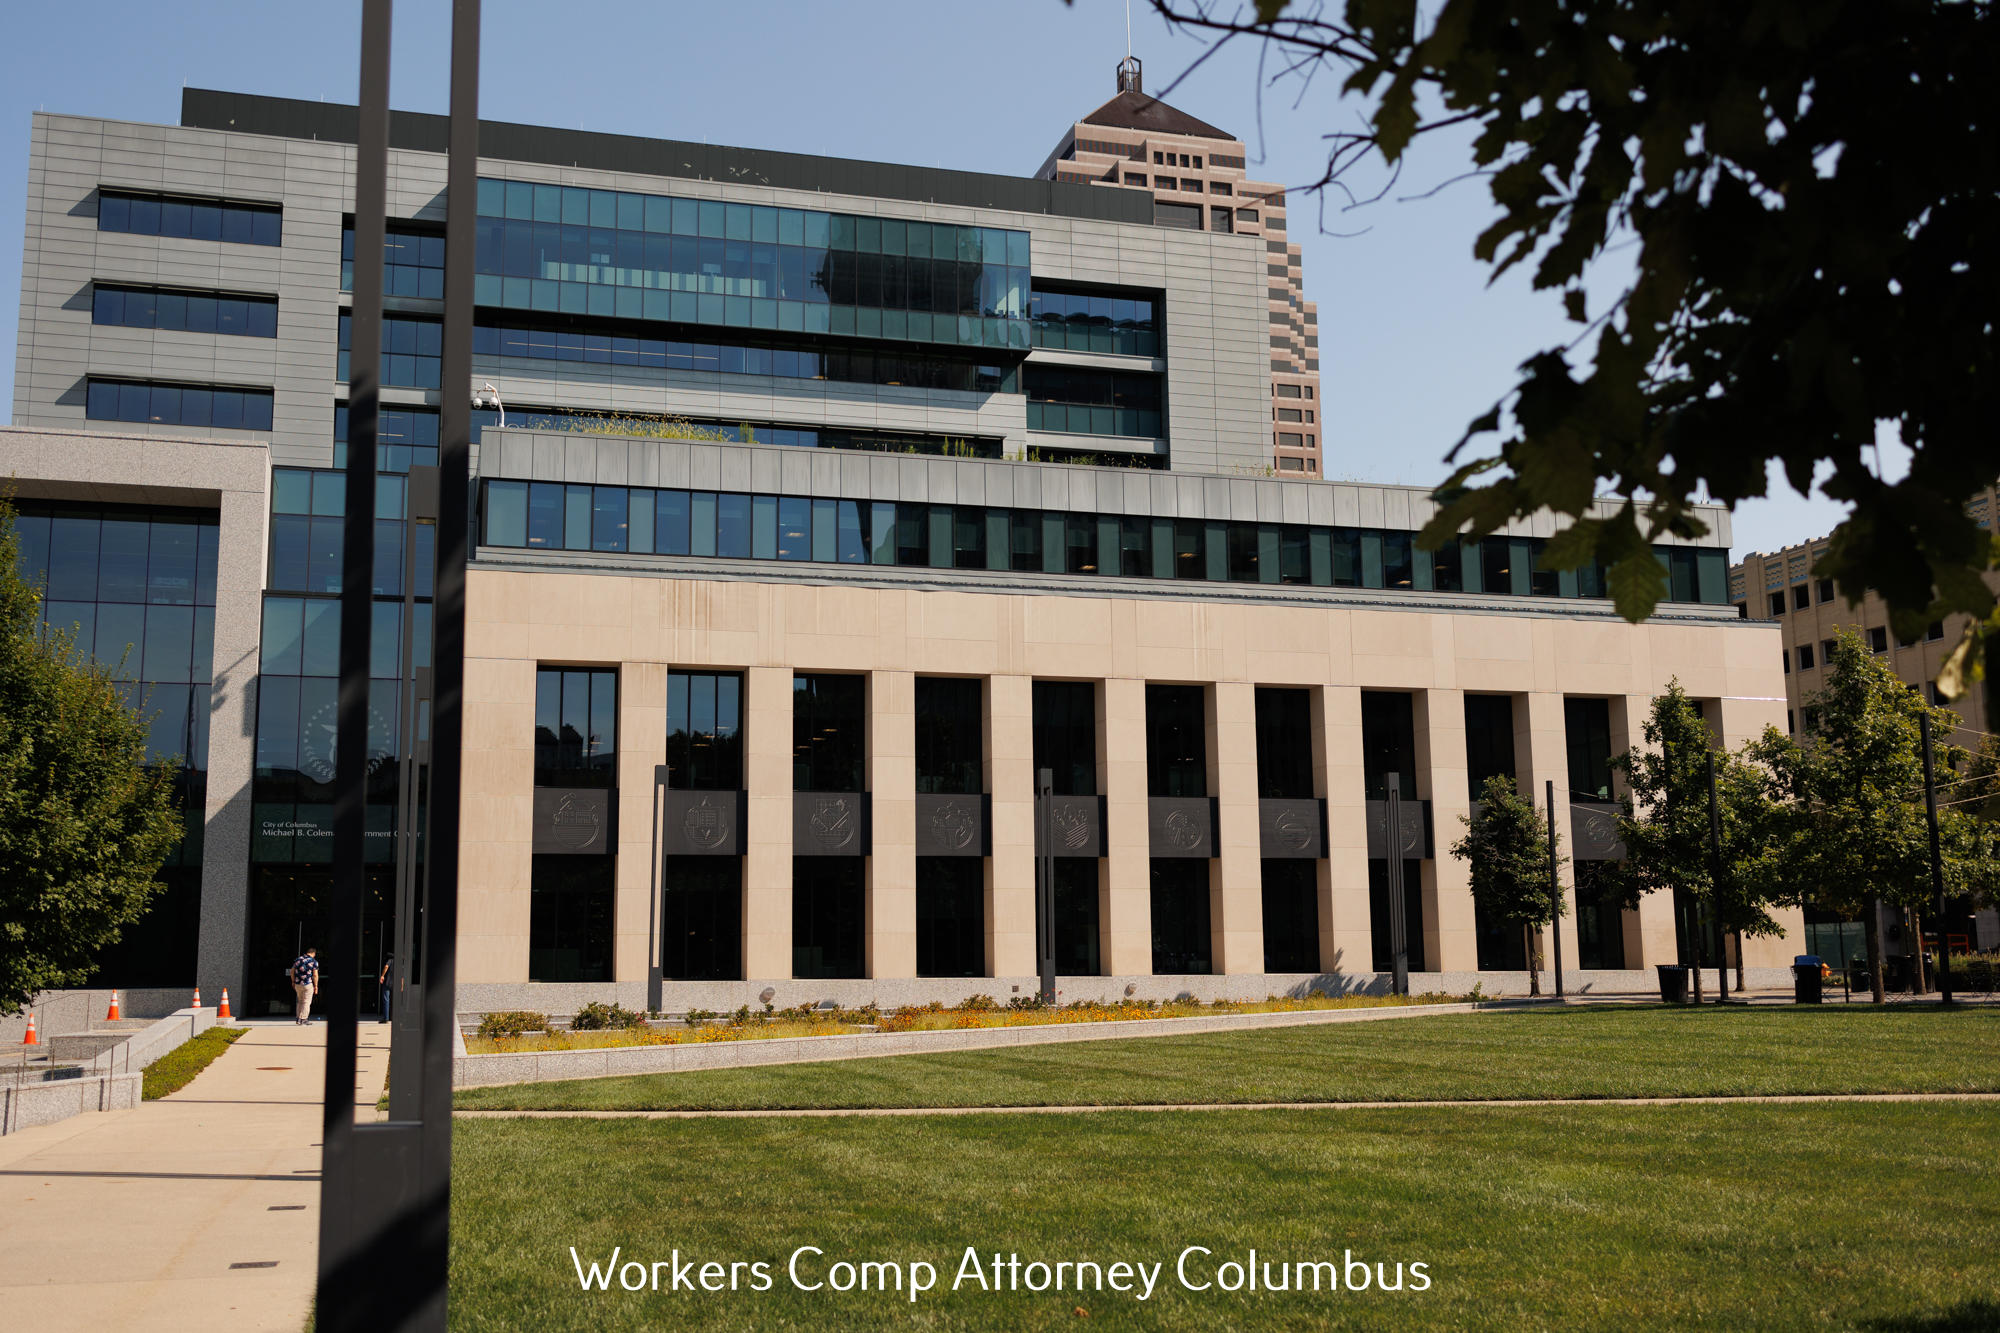 Larrimer & Larrimer Explains How a Workers Compensation Attorney Can be of Assistance